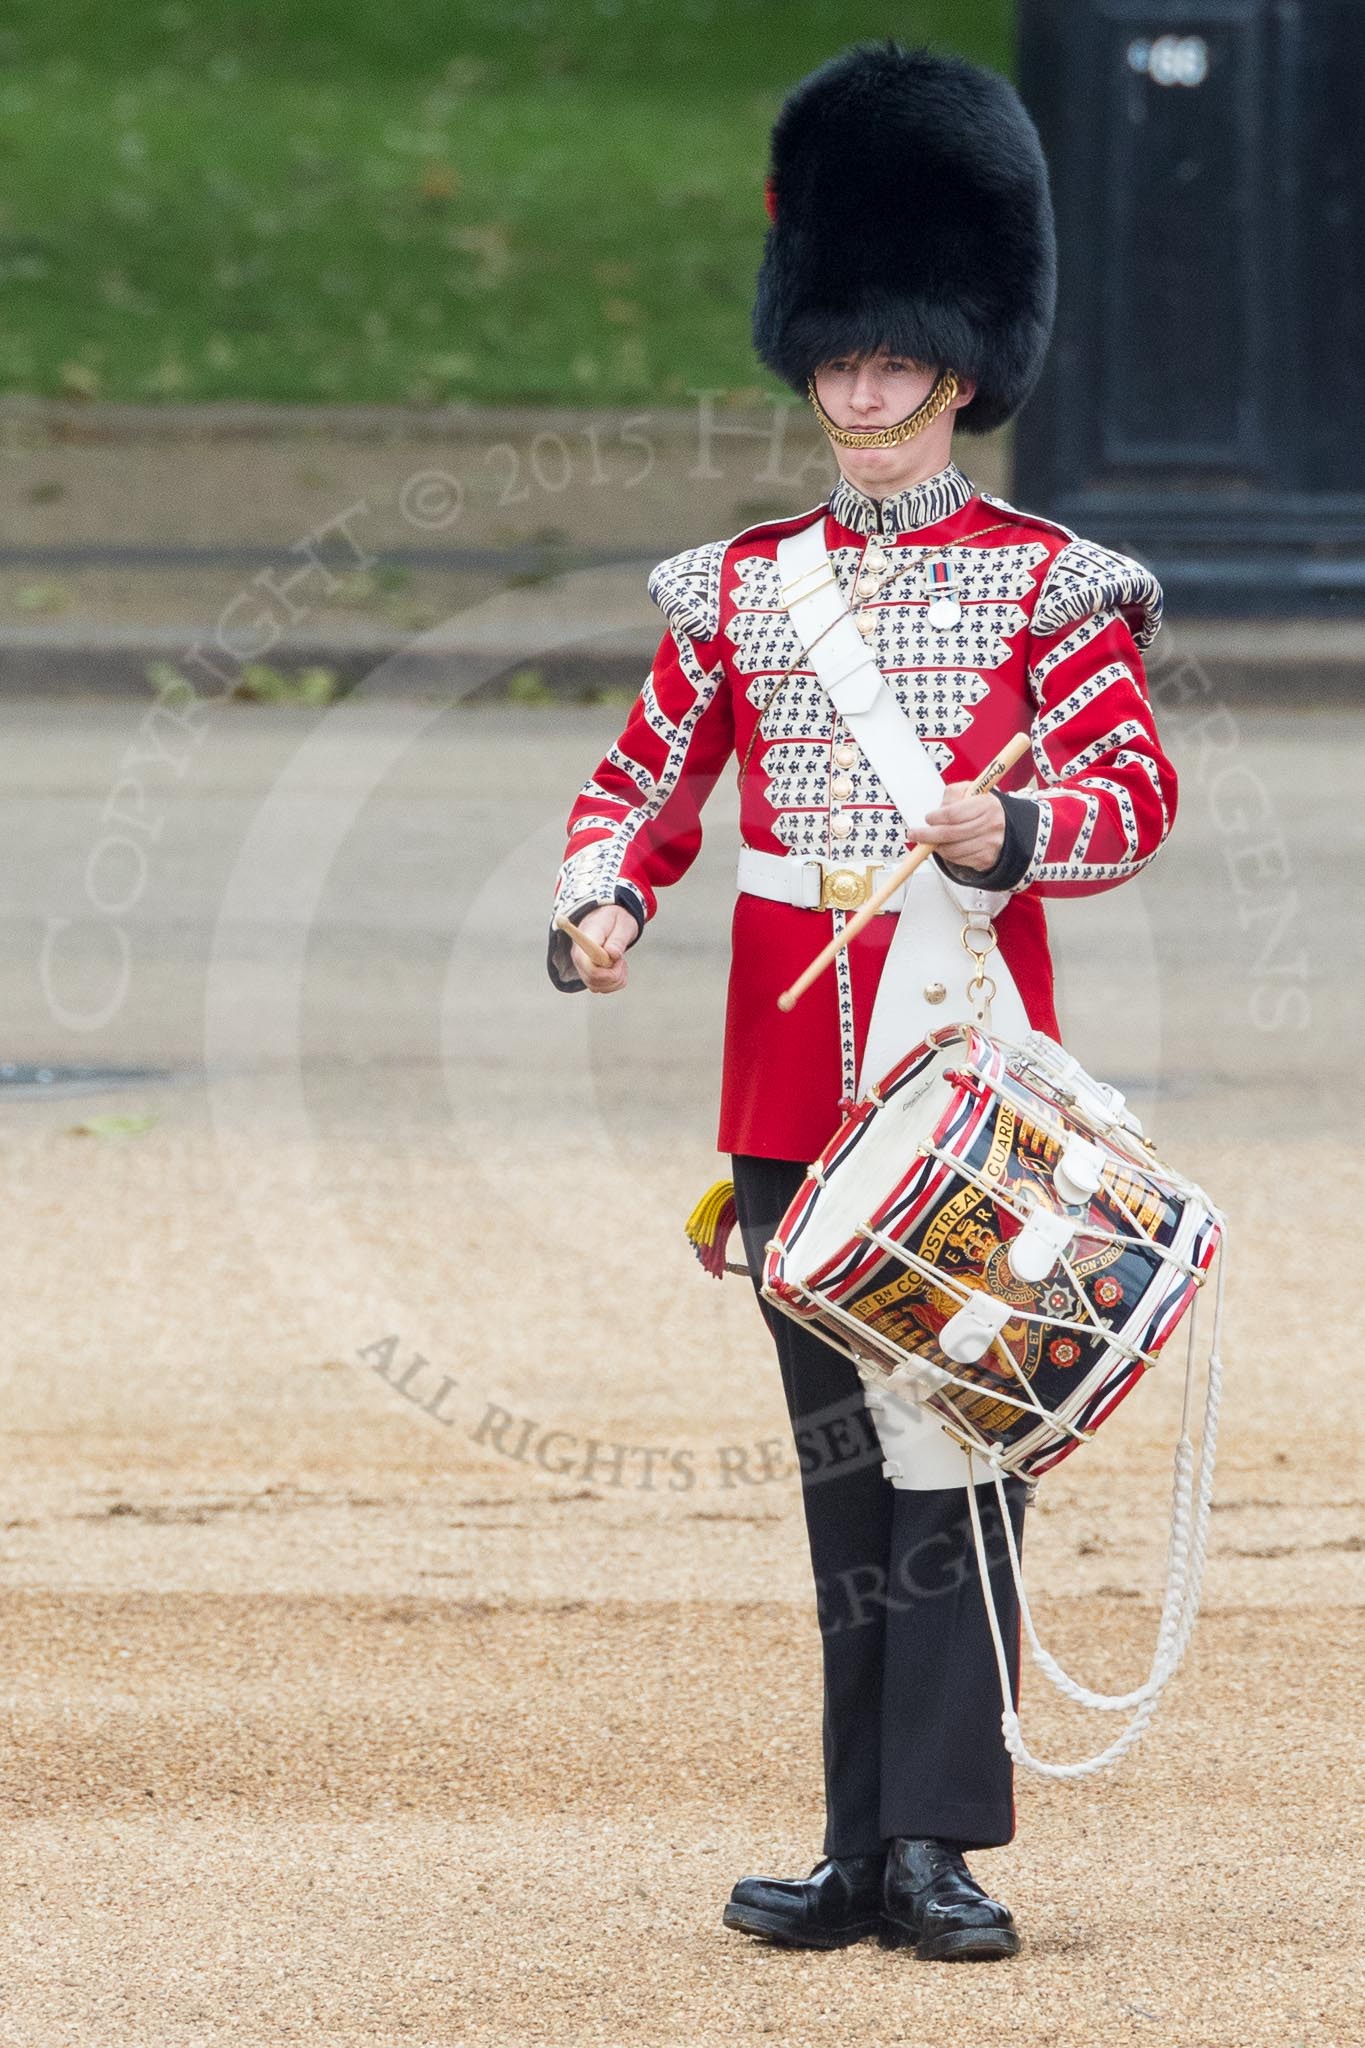 Trooping the Colour 2016.
Horse Guards Parade, Westminster,
London SW1A,
London,
United Kingdom,
on 11 June 2016 at 11:16, image #462